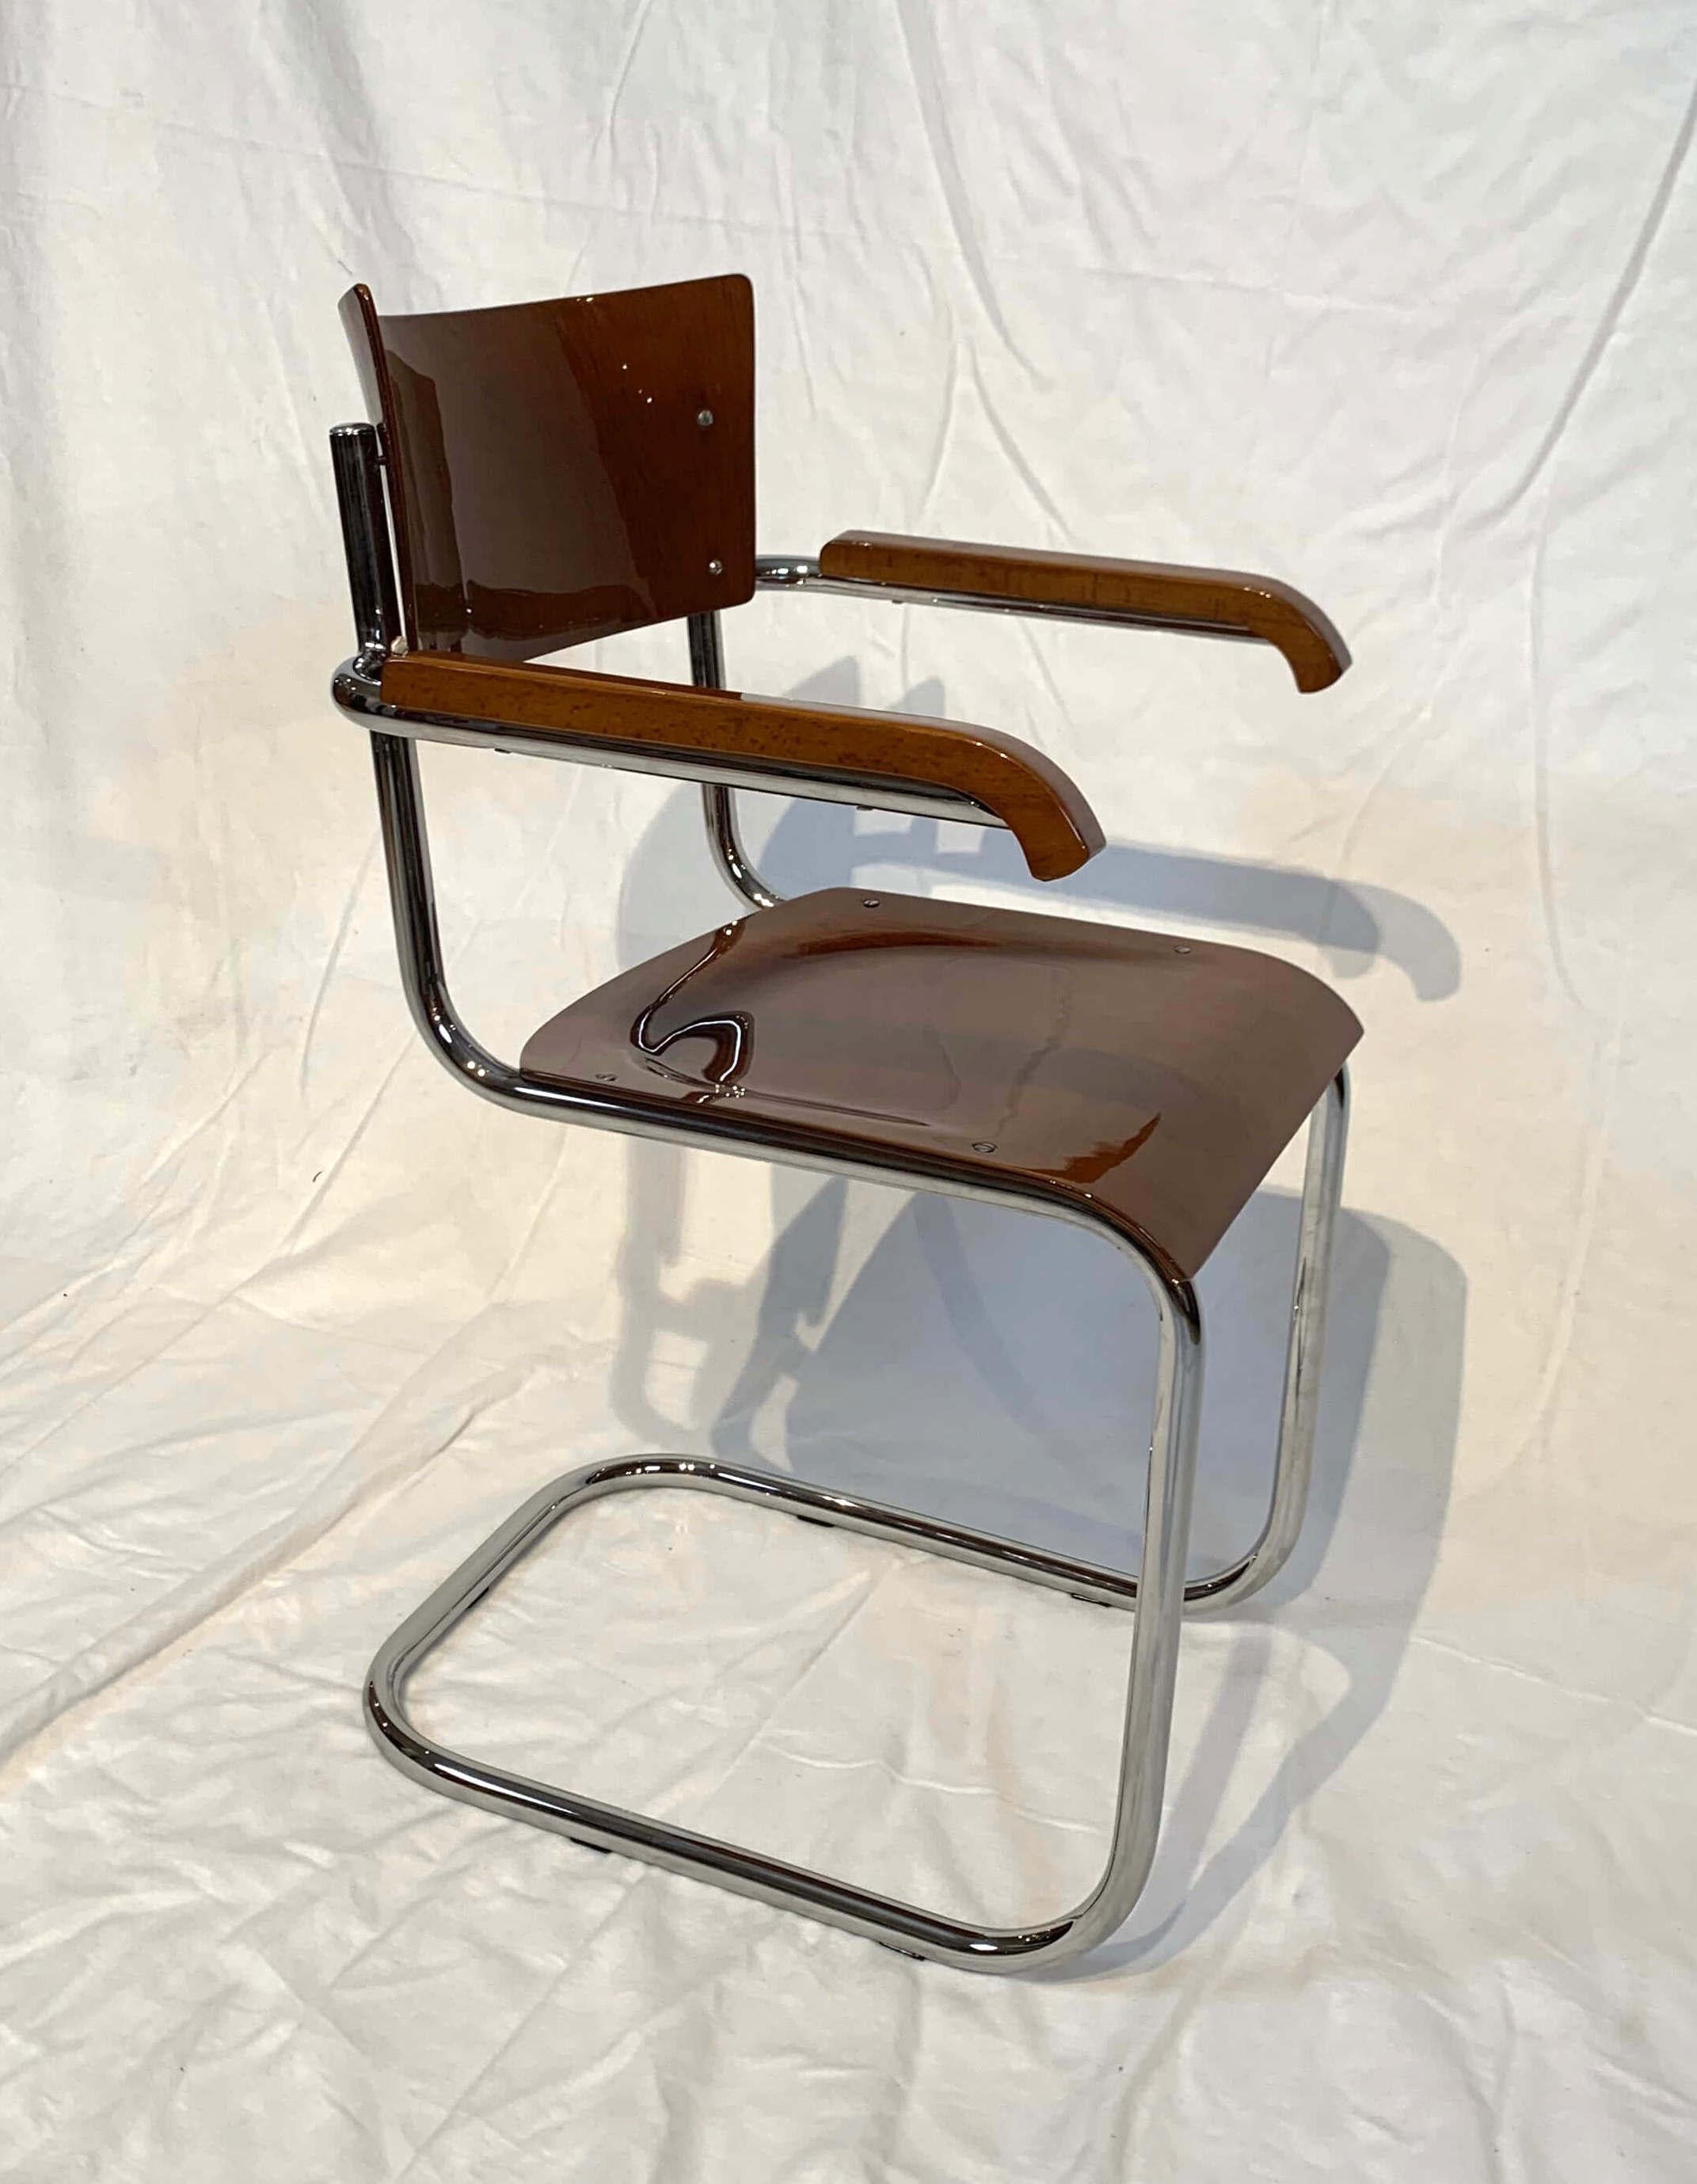 Fully restored original Bauhaus period cantilever armchair from Czechia, 1930s..

Tubular steel construction, newly chrome-plated and polished. Perfect surface, no rust or scratches. Beech veneered on plywood and solid wood on the armrests. All